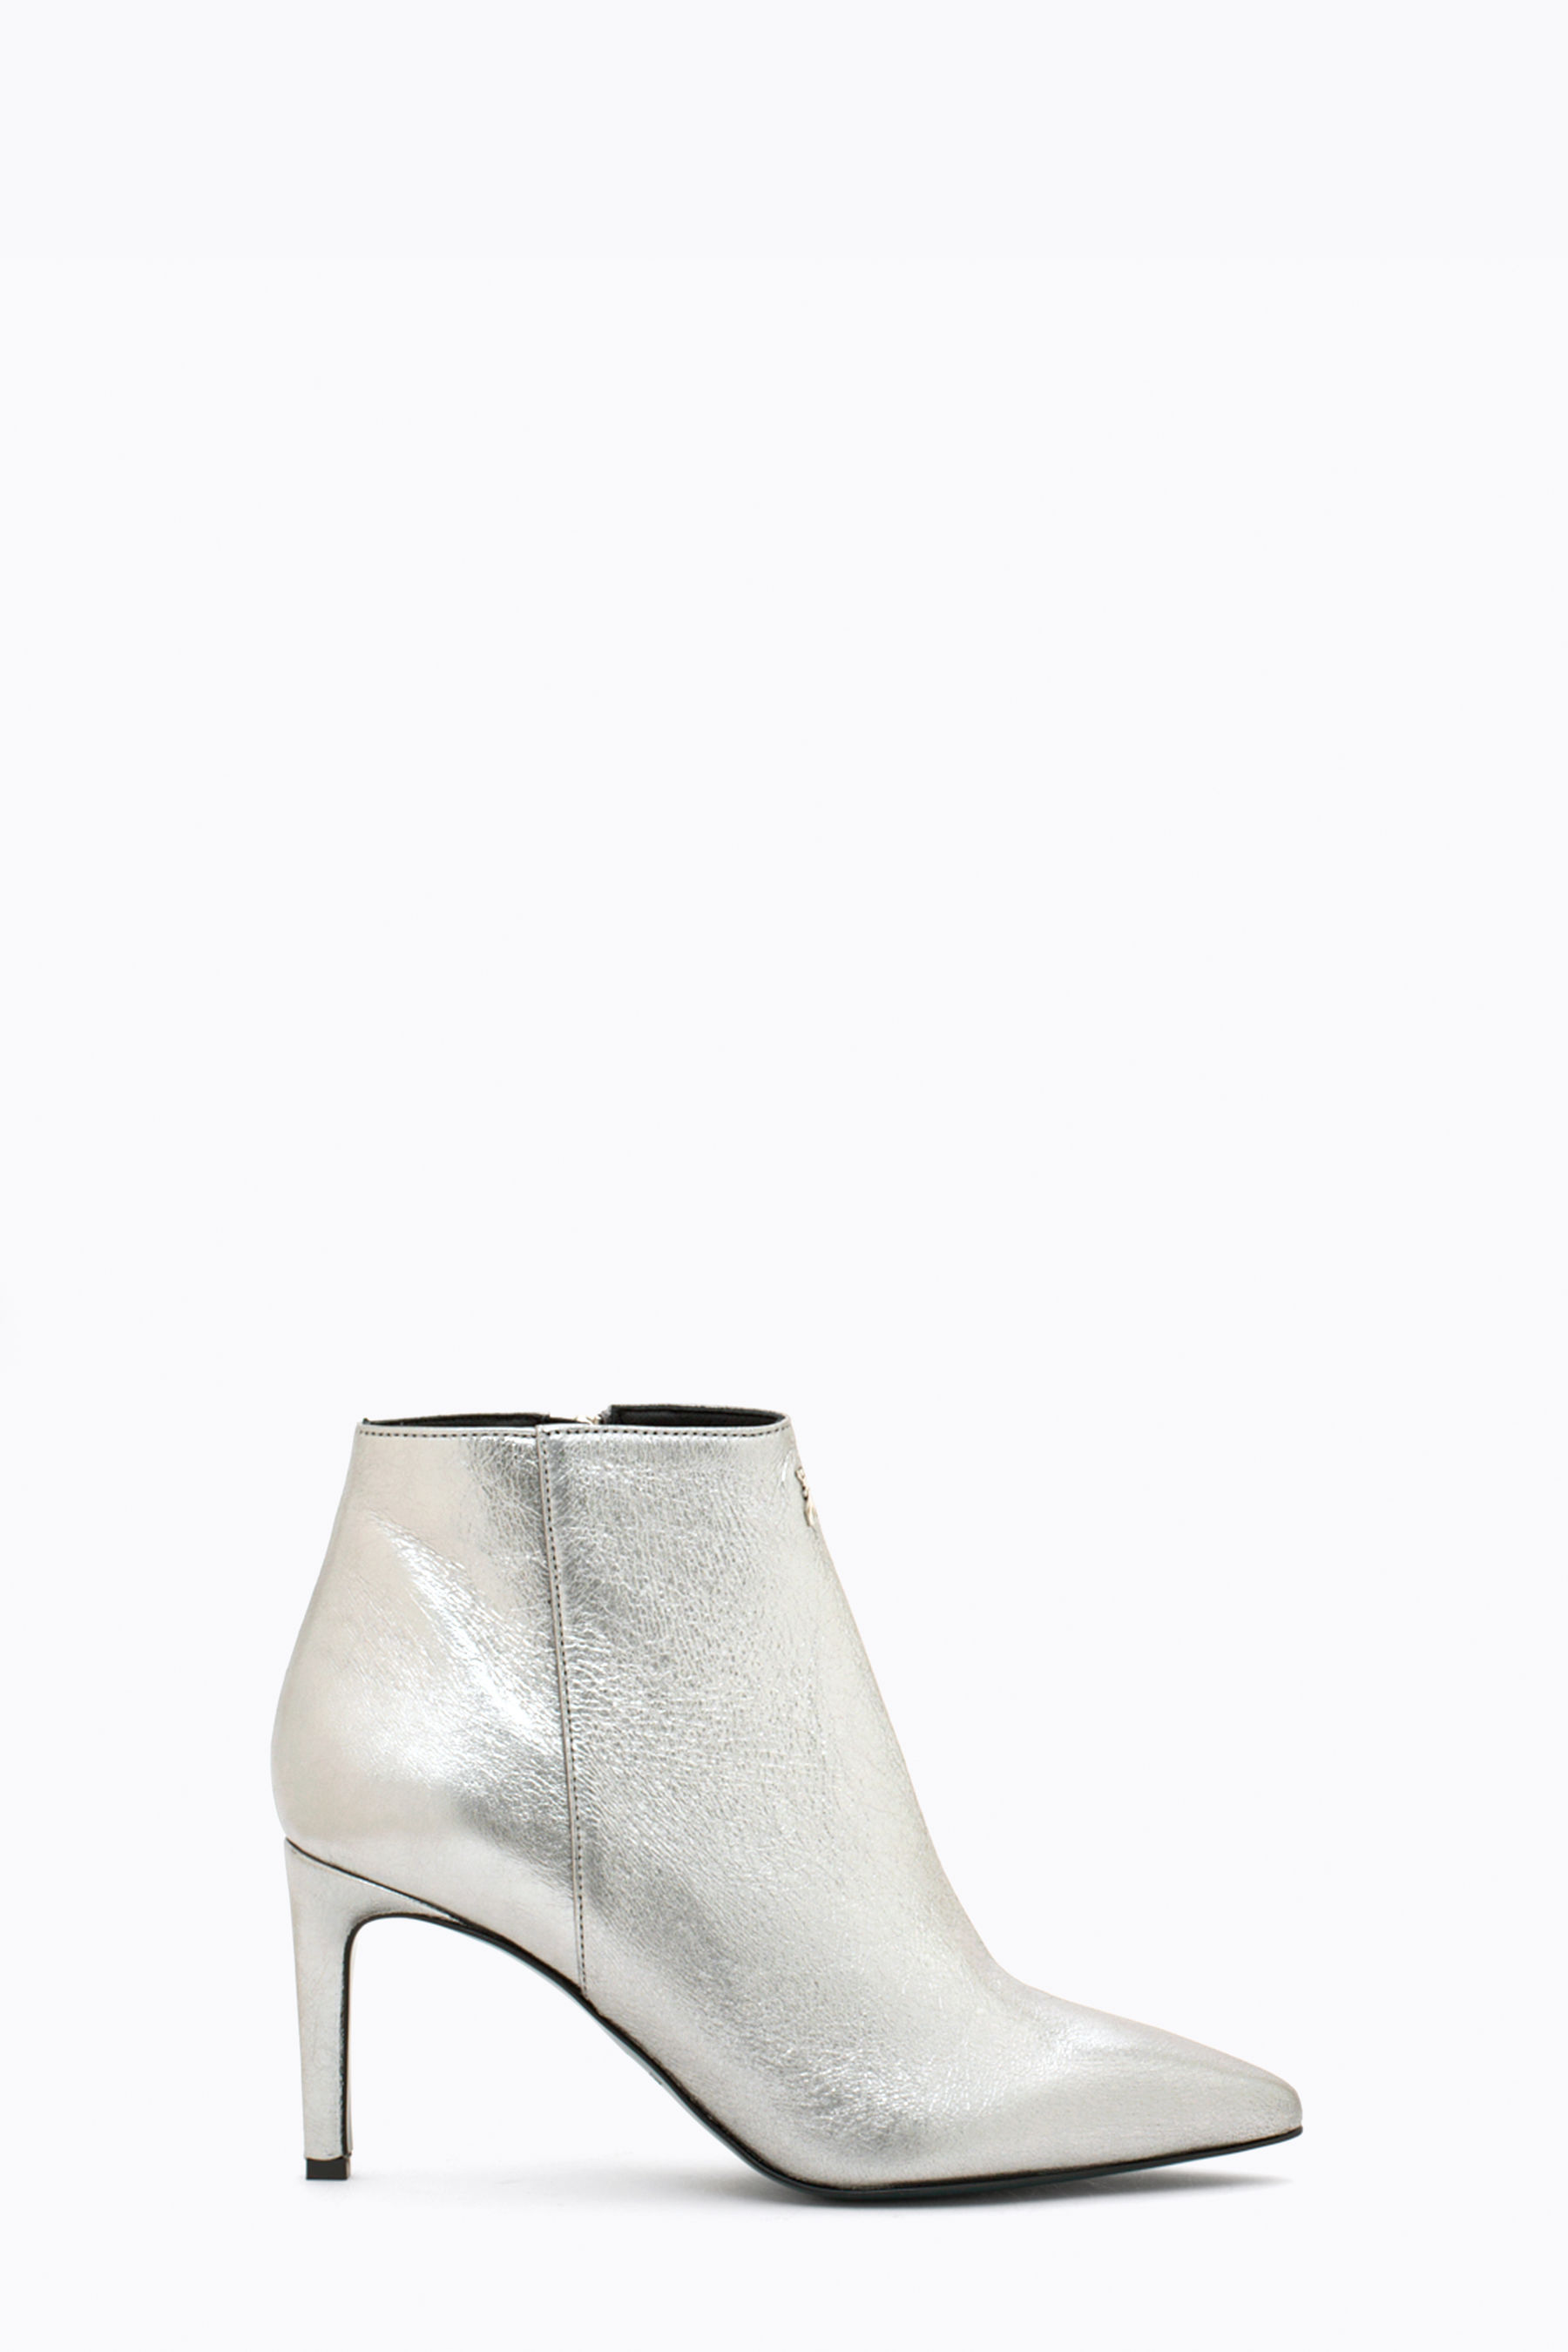 metallic silver ankle boots